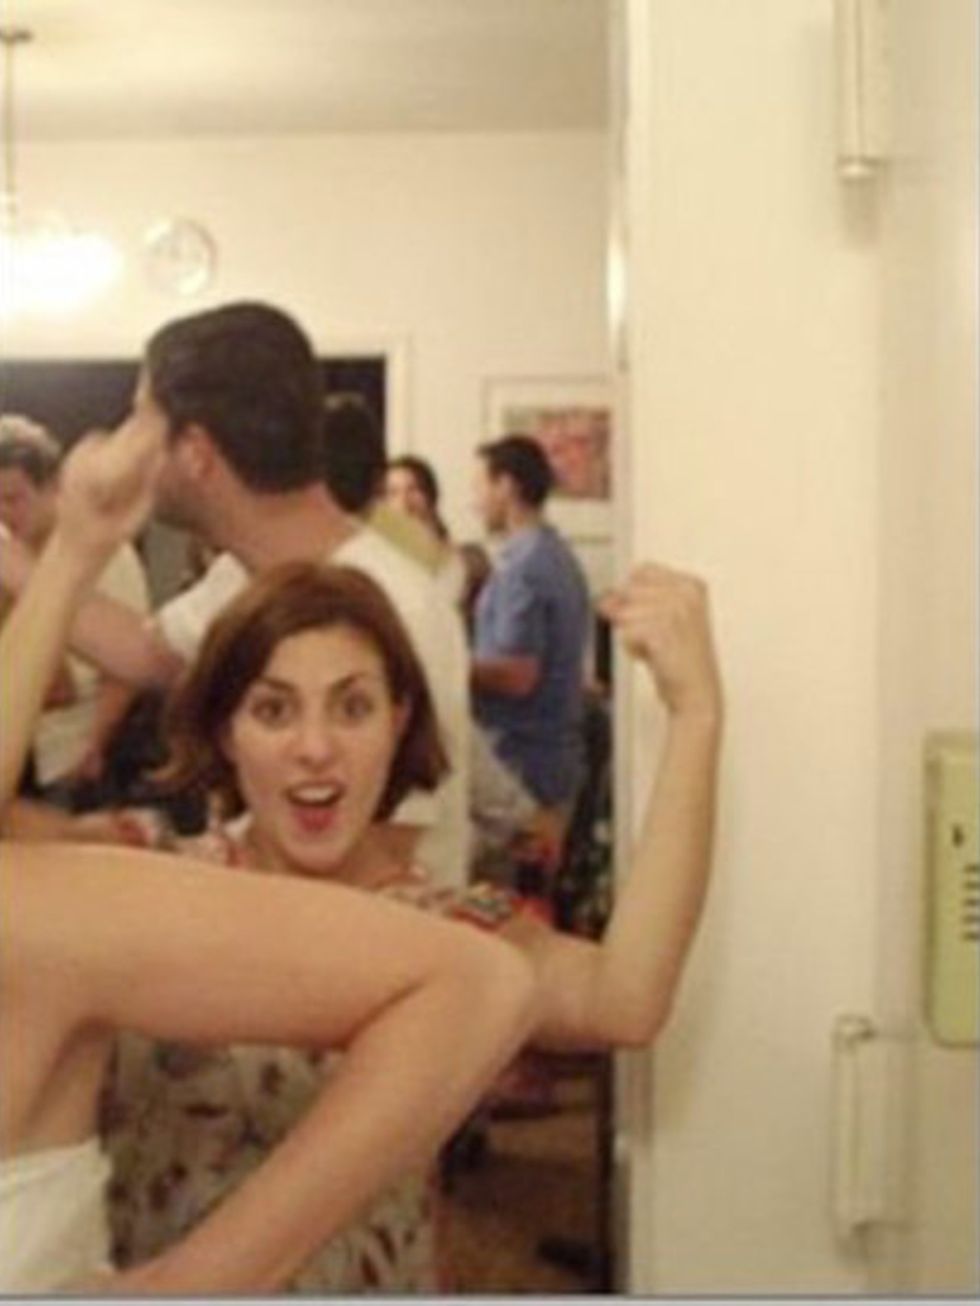 <p>Christina Simone, Workflow Director </p><p>March 13, 2008 at a party in Williamsburg, Brooklyn. Flexing my guns, as usual. </p>